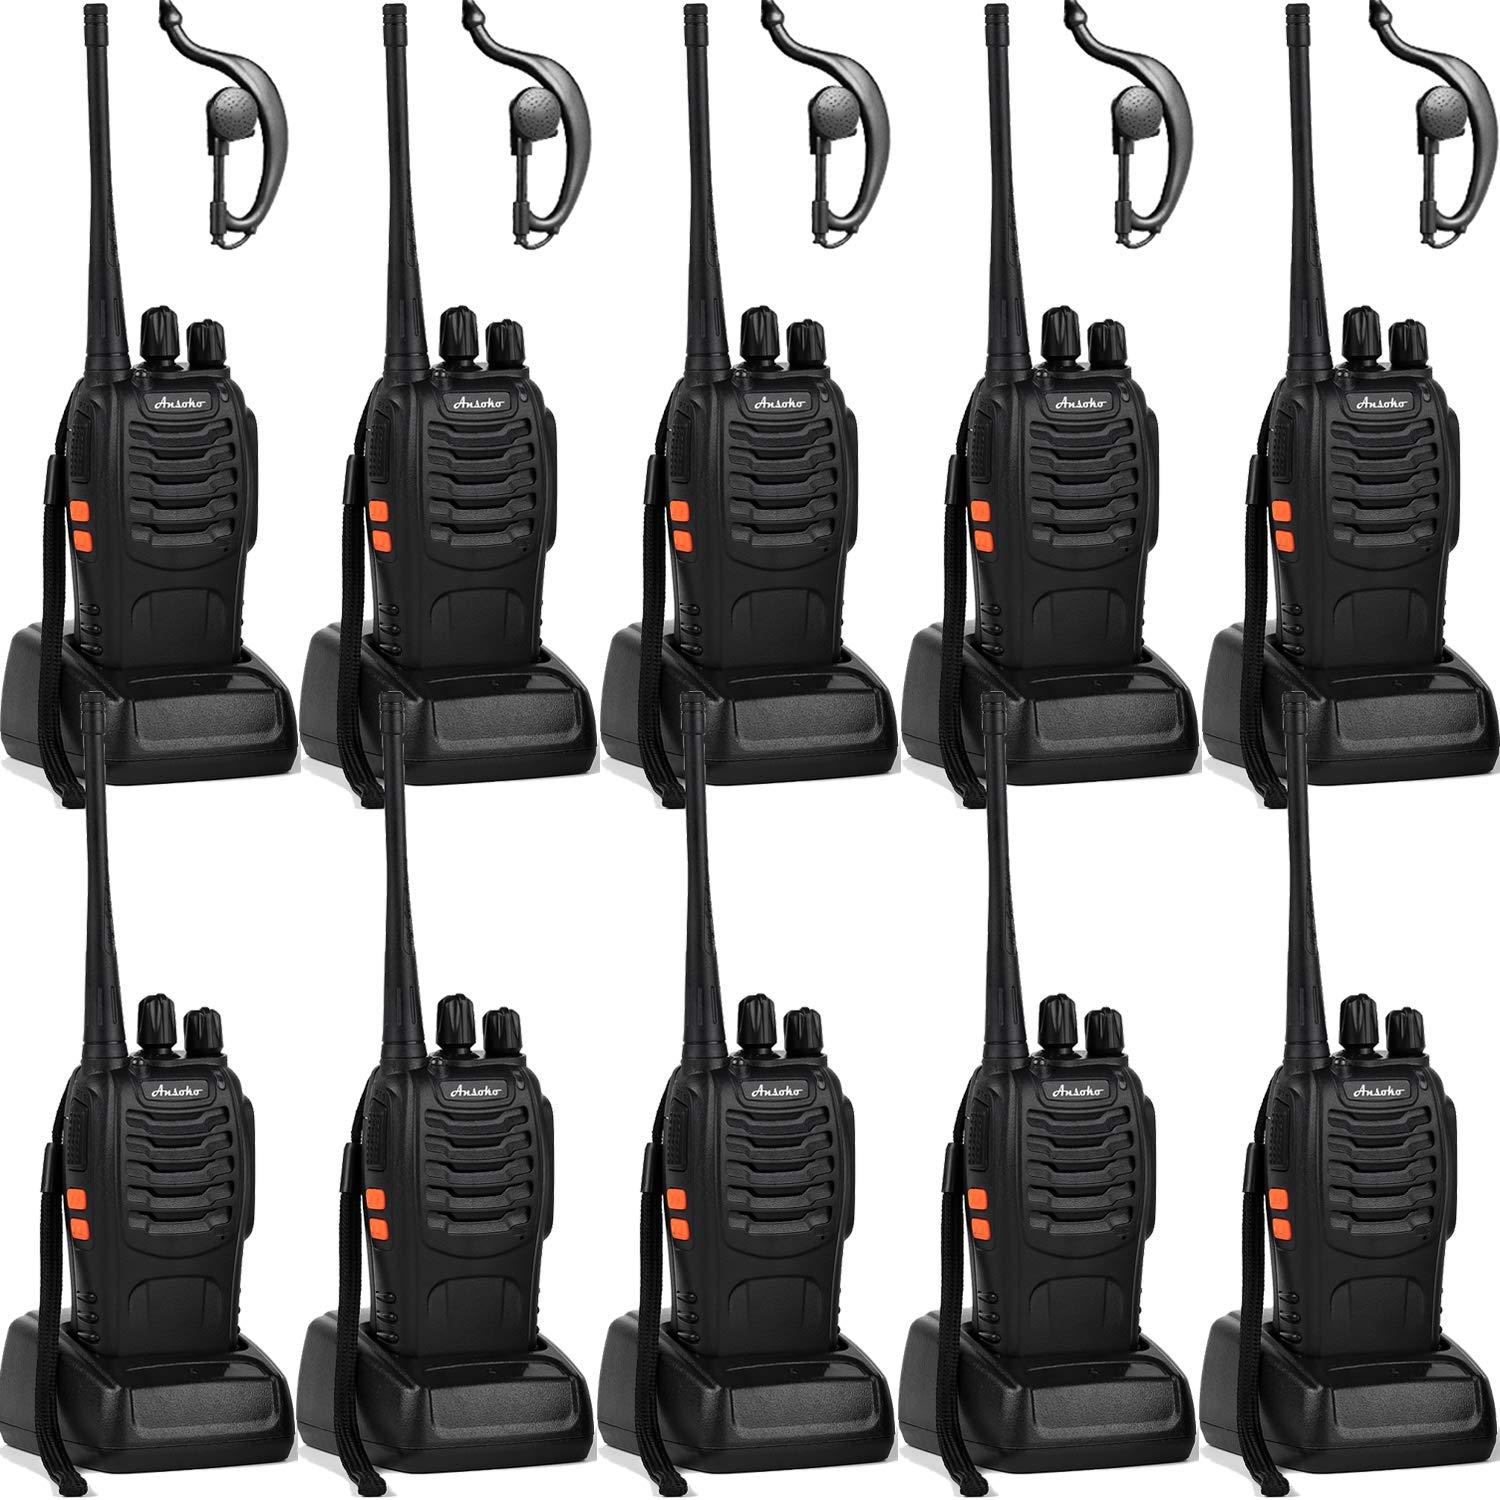 Ansoko Walkie talkies 10 Pack Long Range Rechargeable 2 Way Radio UHF 16-Channel with Earpiece Li-ion Battery and Charger Pa